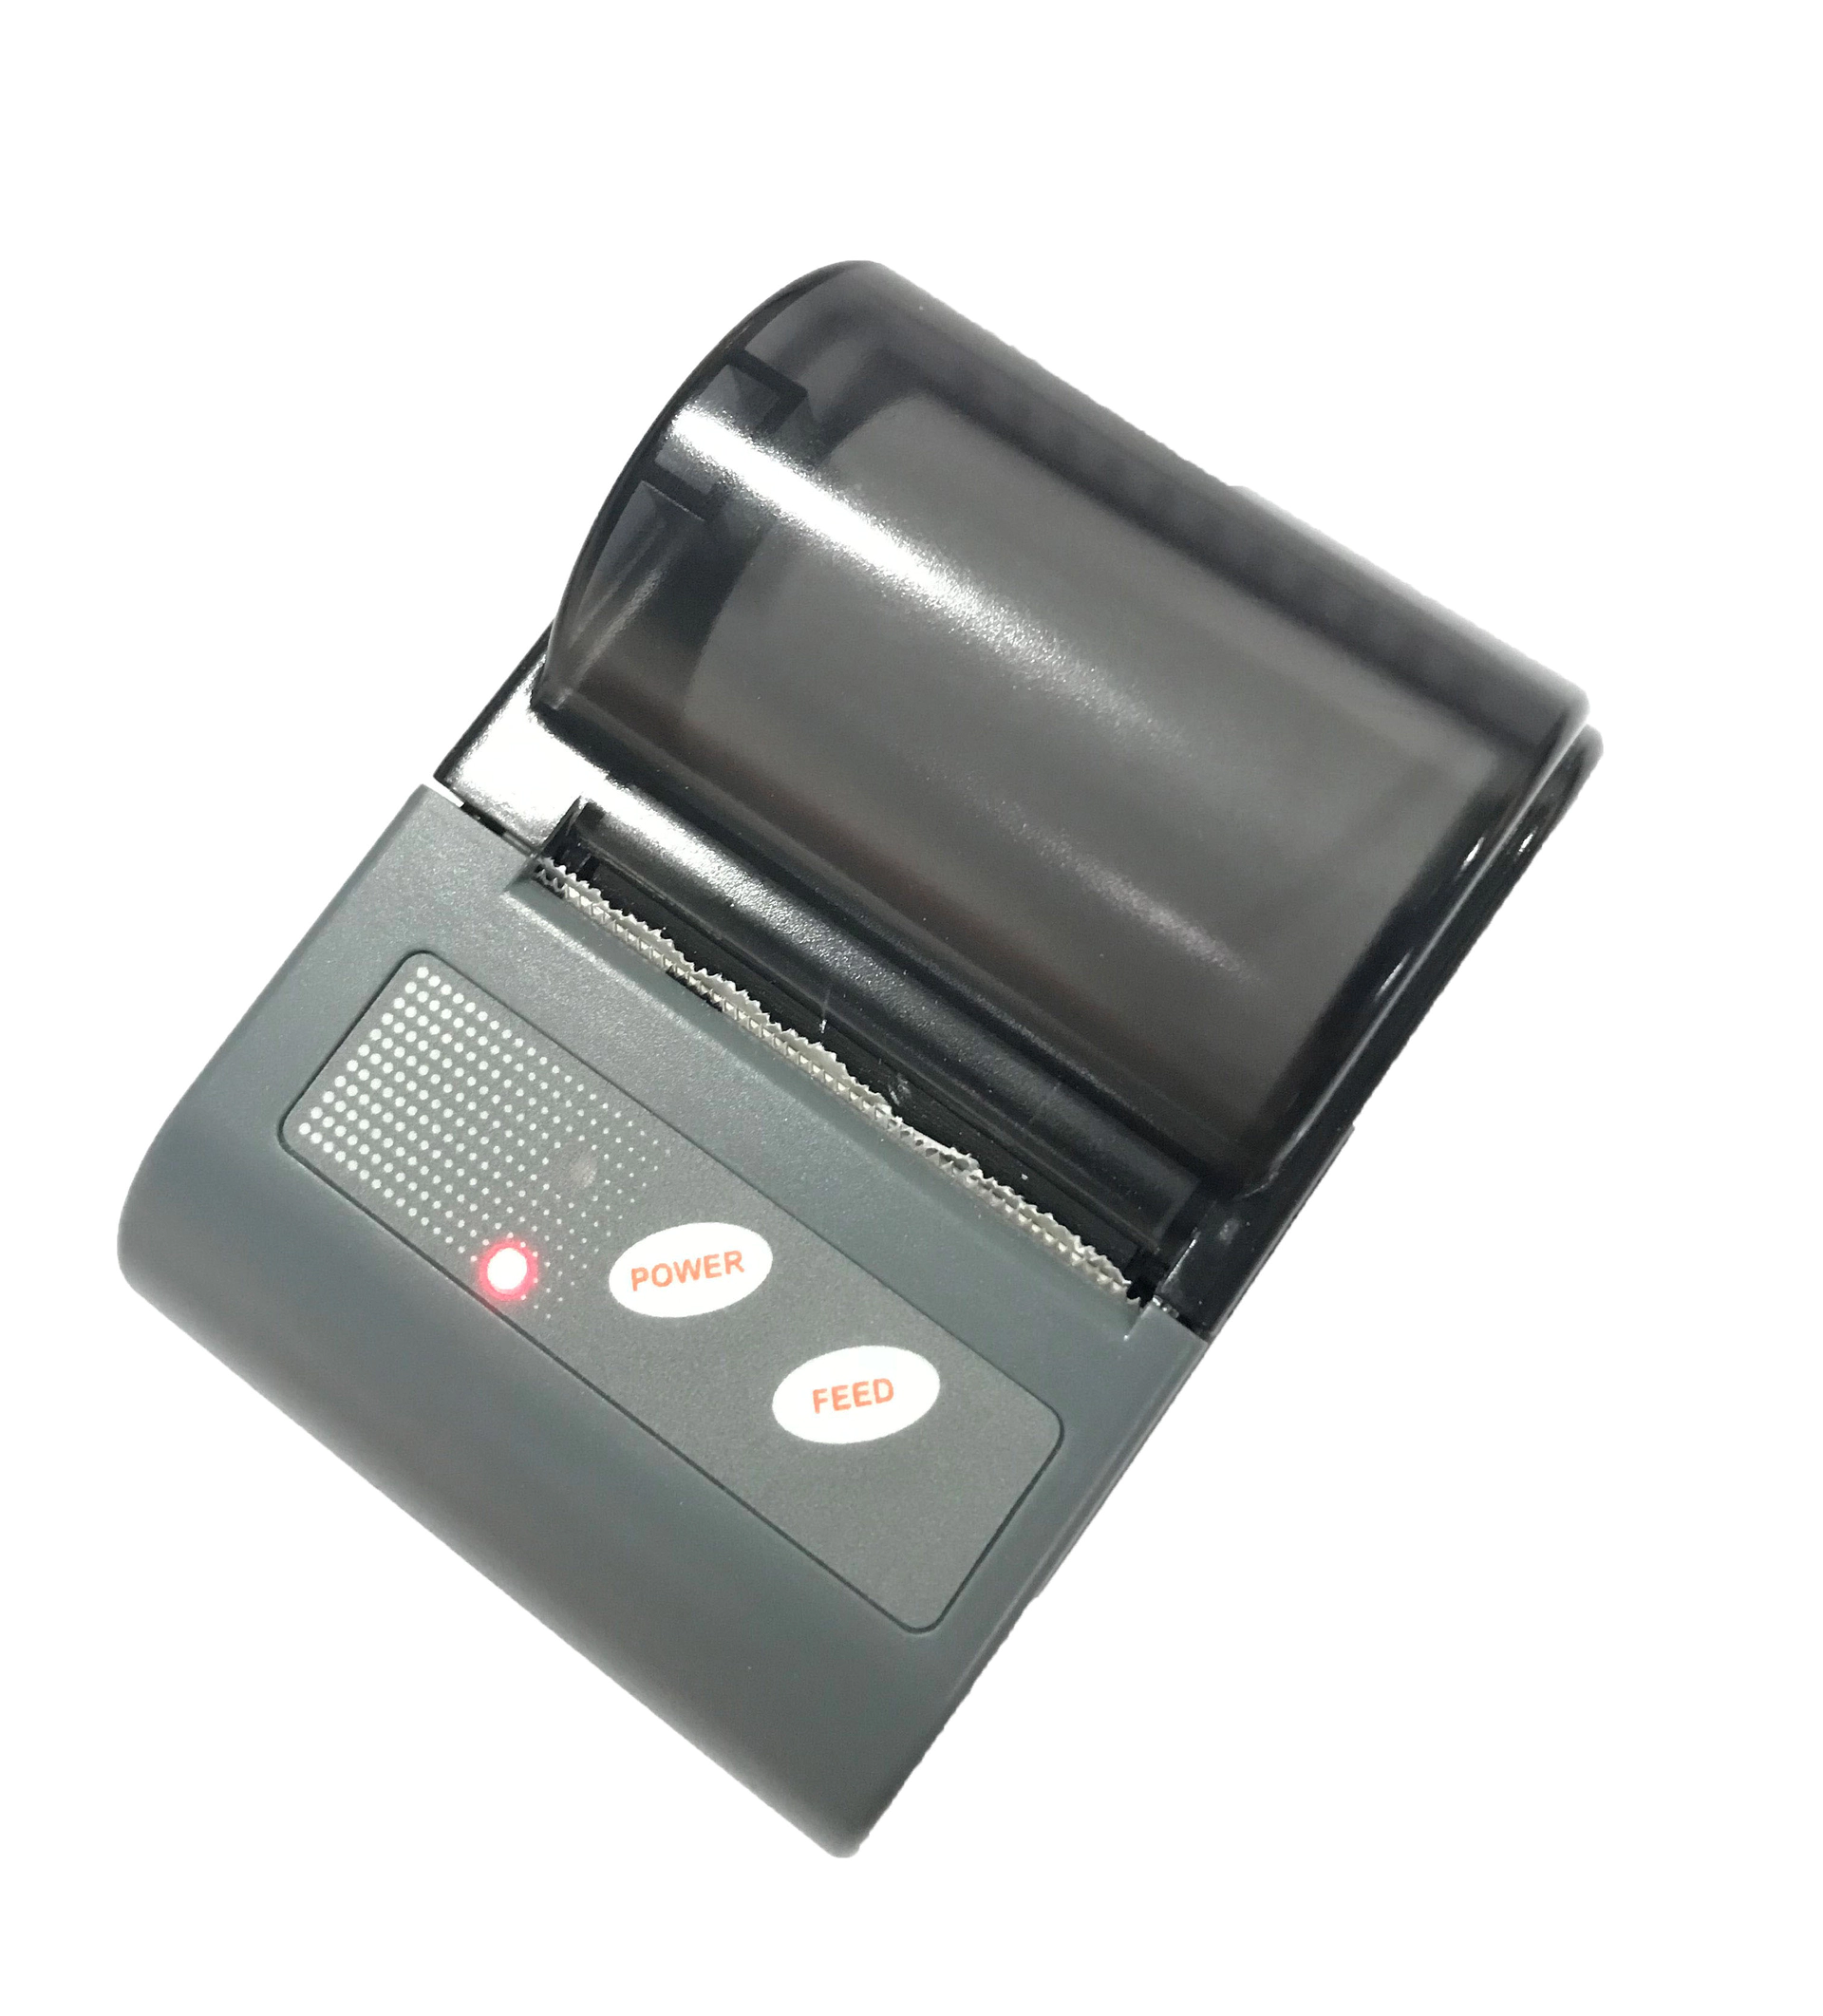 Mini Mobile Bluetooth Printer Pocket Printer for Android and iOS Phone